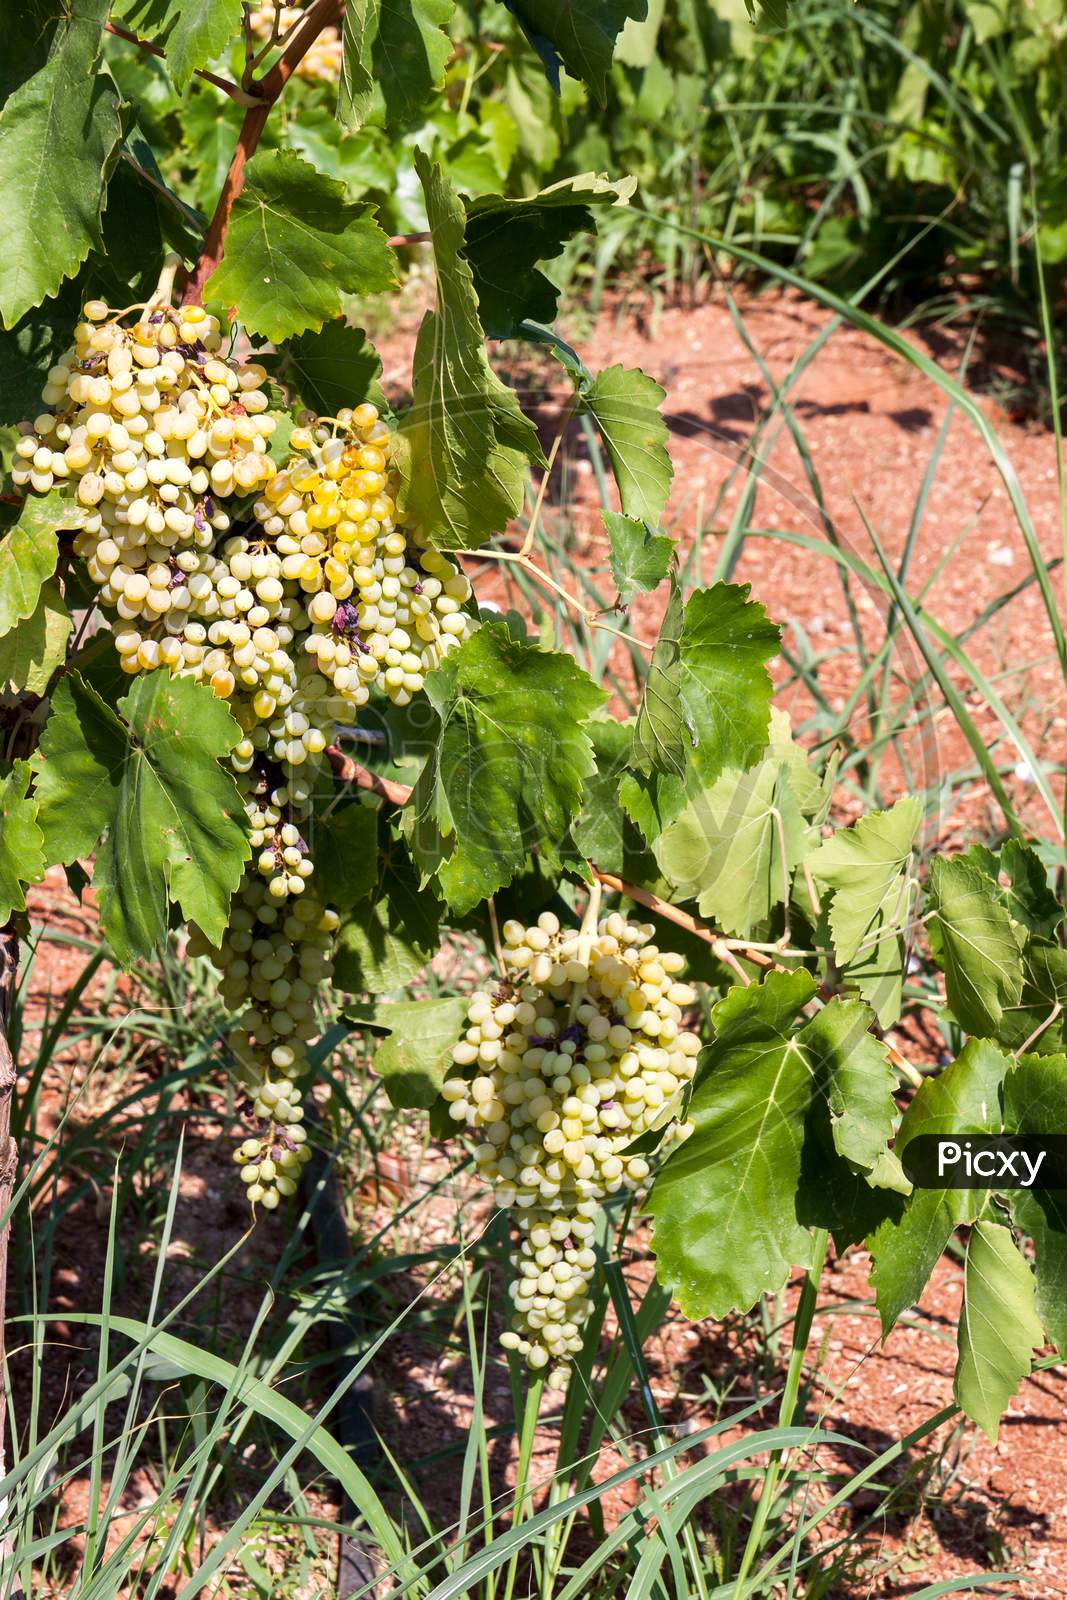 Bunches Of Grapes Ripening In The Sun